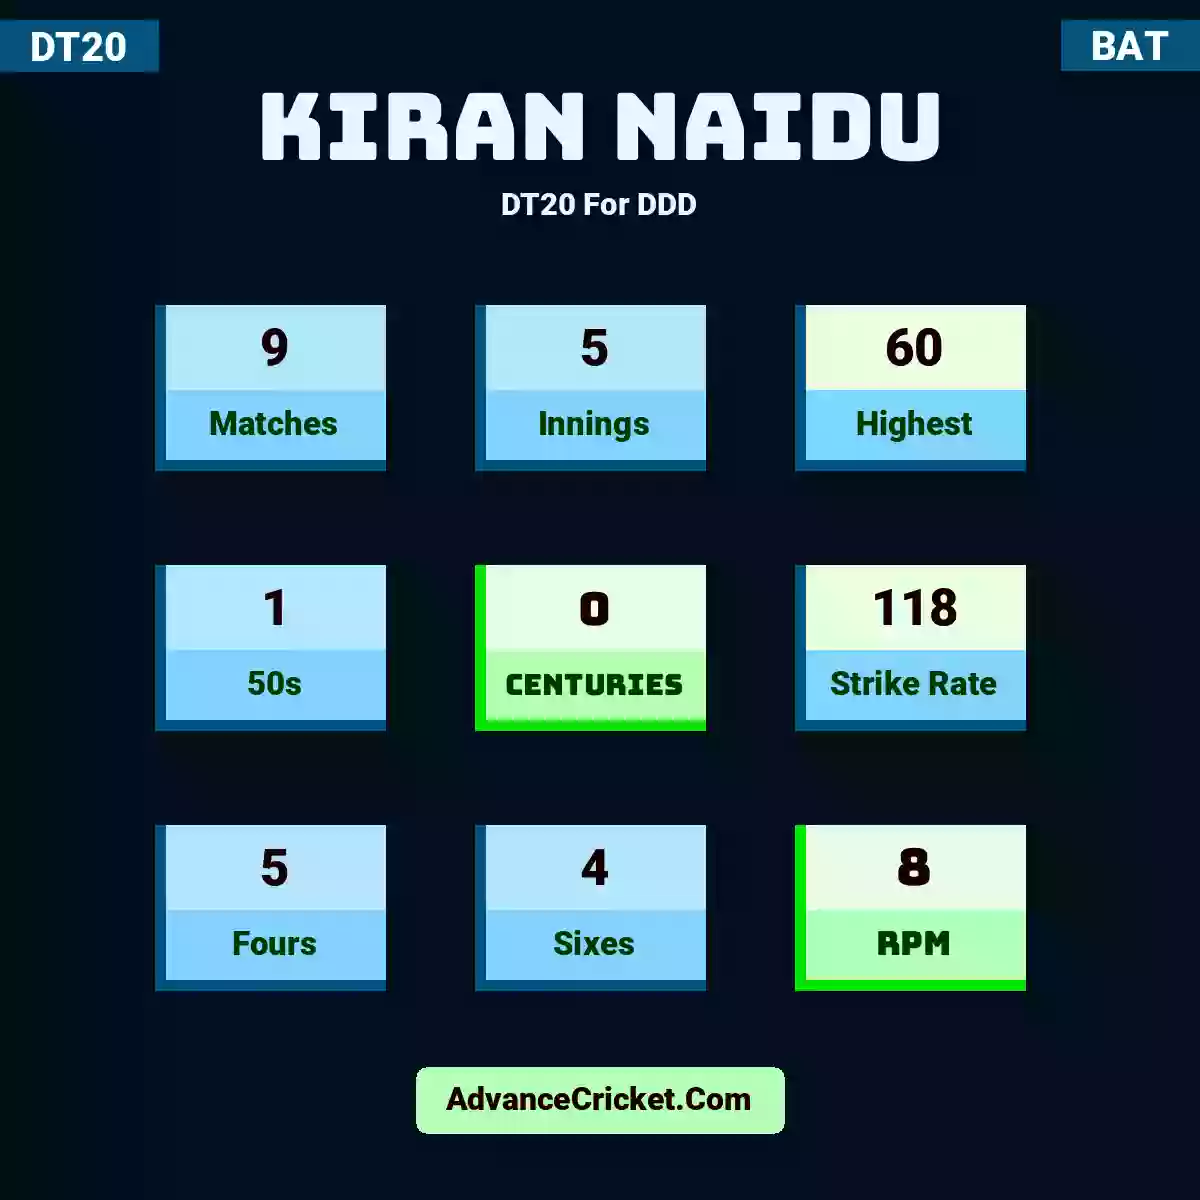 Kiran Naidu DT20  For DDD, Kiran Naidu played 9 matches, scored 60 runs as highest, 1 half-centuries, and 0 centuries, with a strike rate of 118. K.Naidu hit 5 fours and 4 sixes, with an RPM of 8.